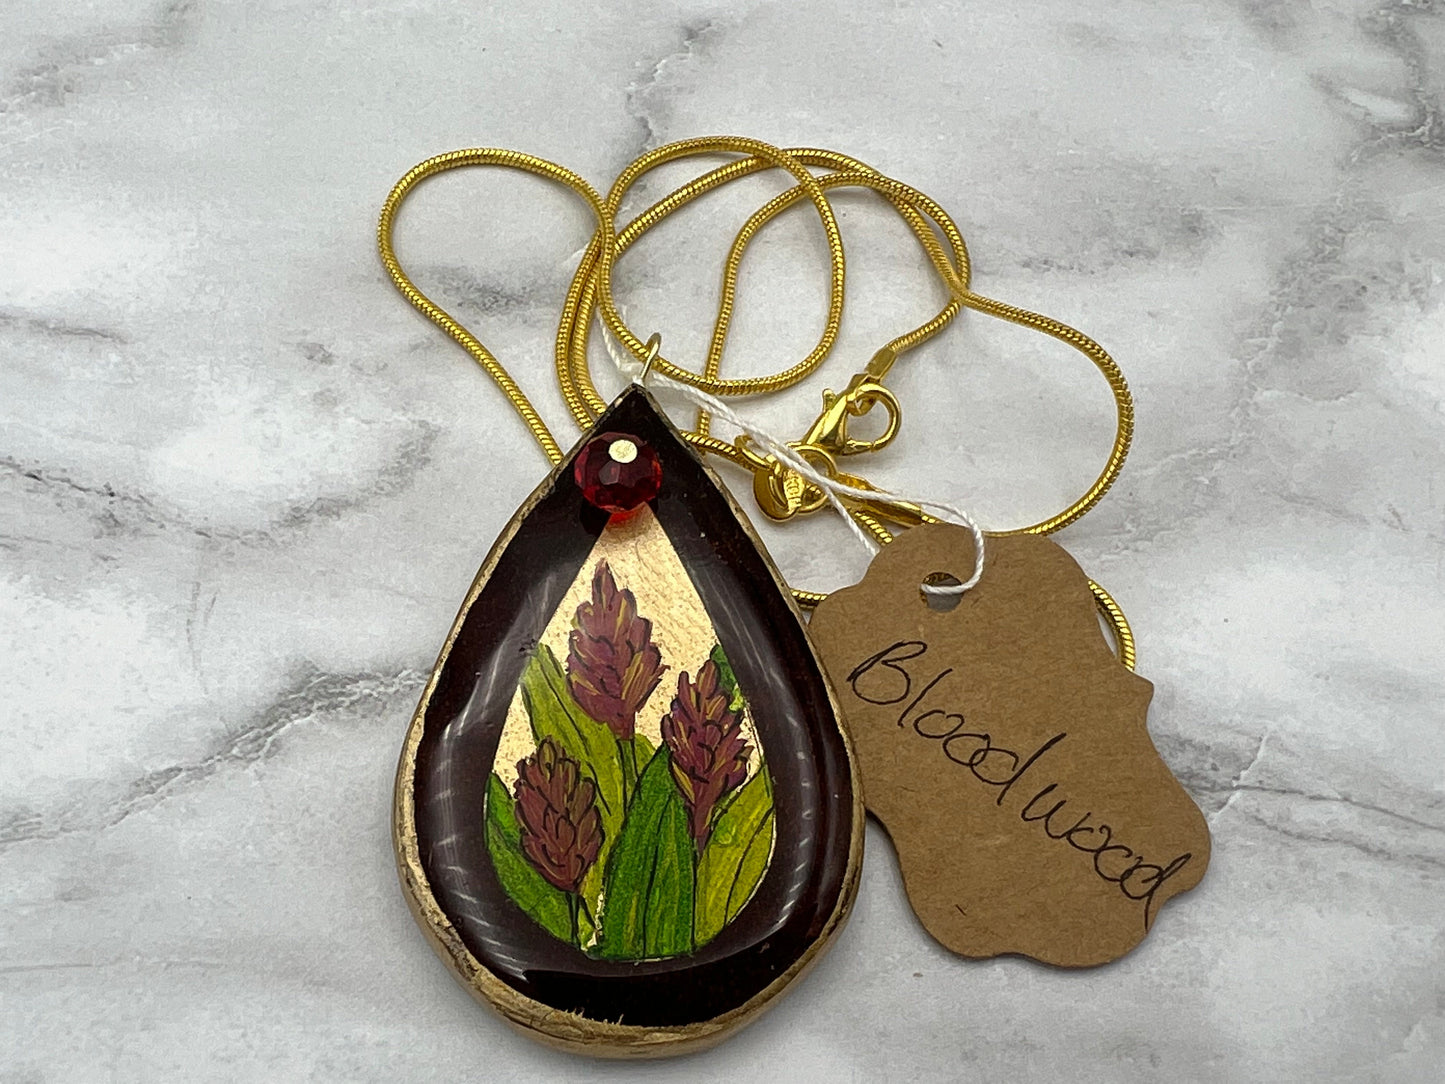 Red Torch Ginger Flowers on Bloodwood - Wooden Pendant Necklace